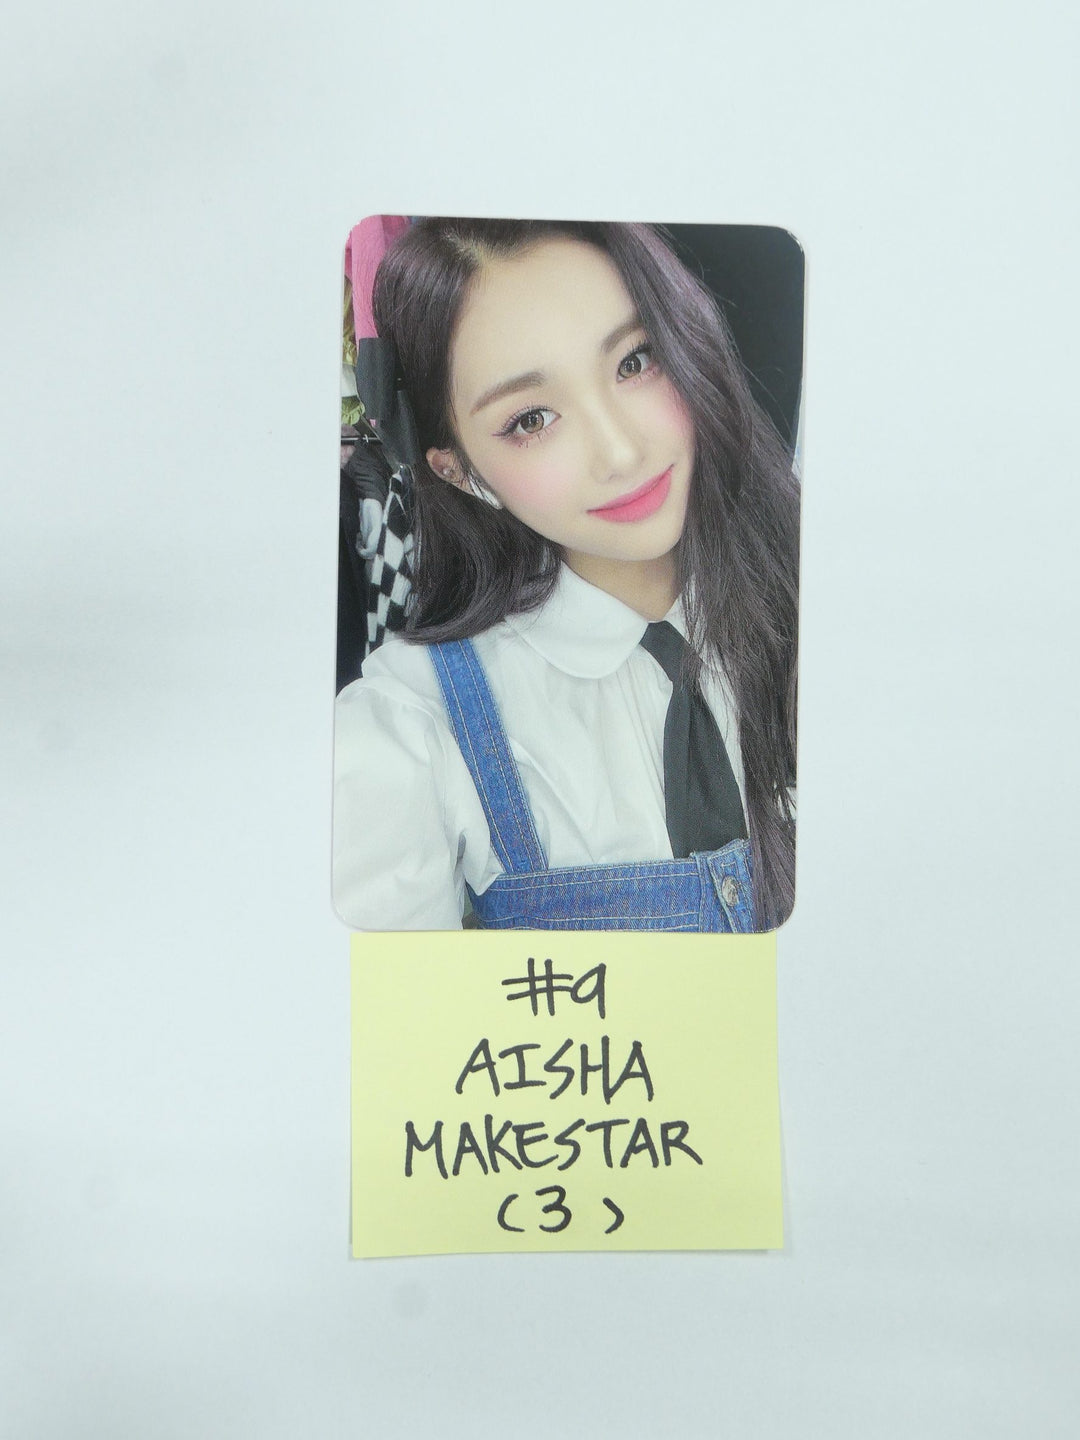 Everglow 'Return of The Girl' - Makestar Fansign Event Photocard [Updated 3/3]